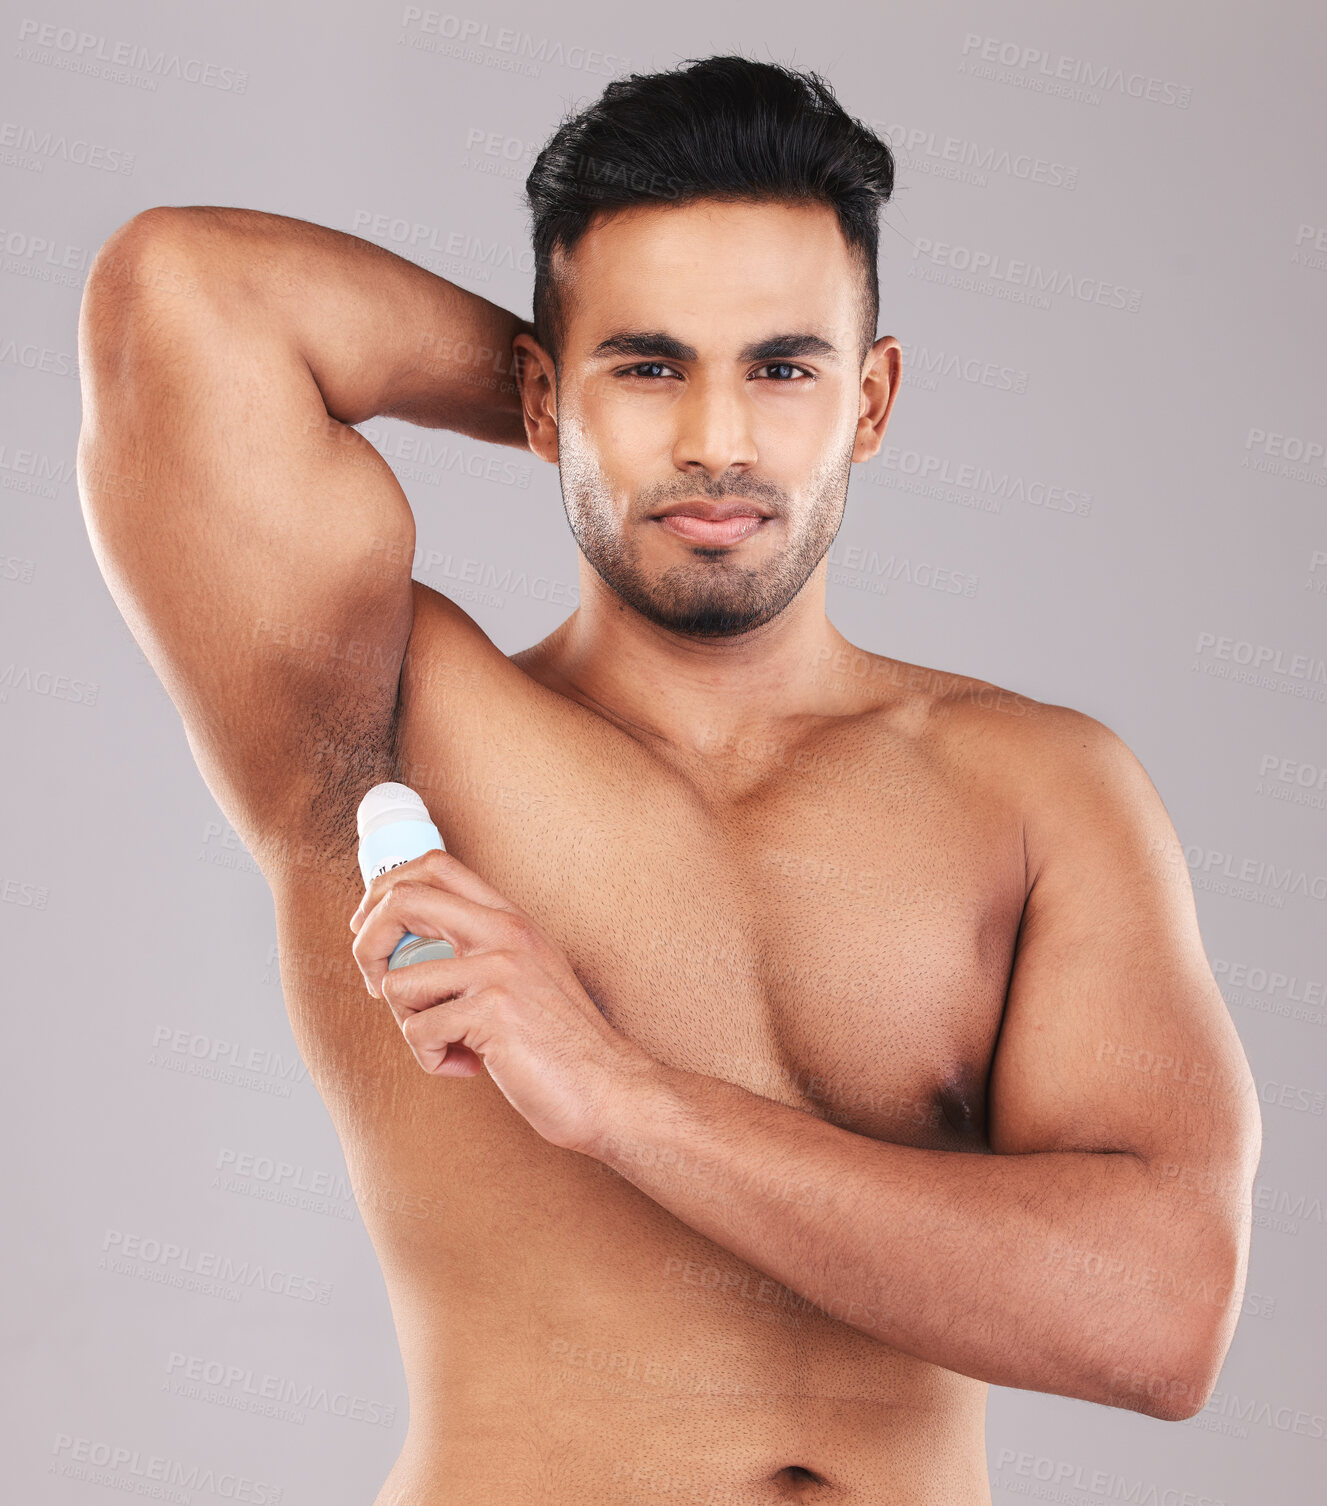 Buy stock photo Deodorant, health and man cleaning armpit against a grey studio background. Wellness, care and portrait of a young model with an underarm product for grooming, clean skin and care for body hygiene